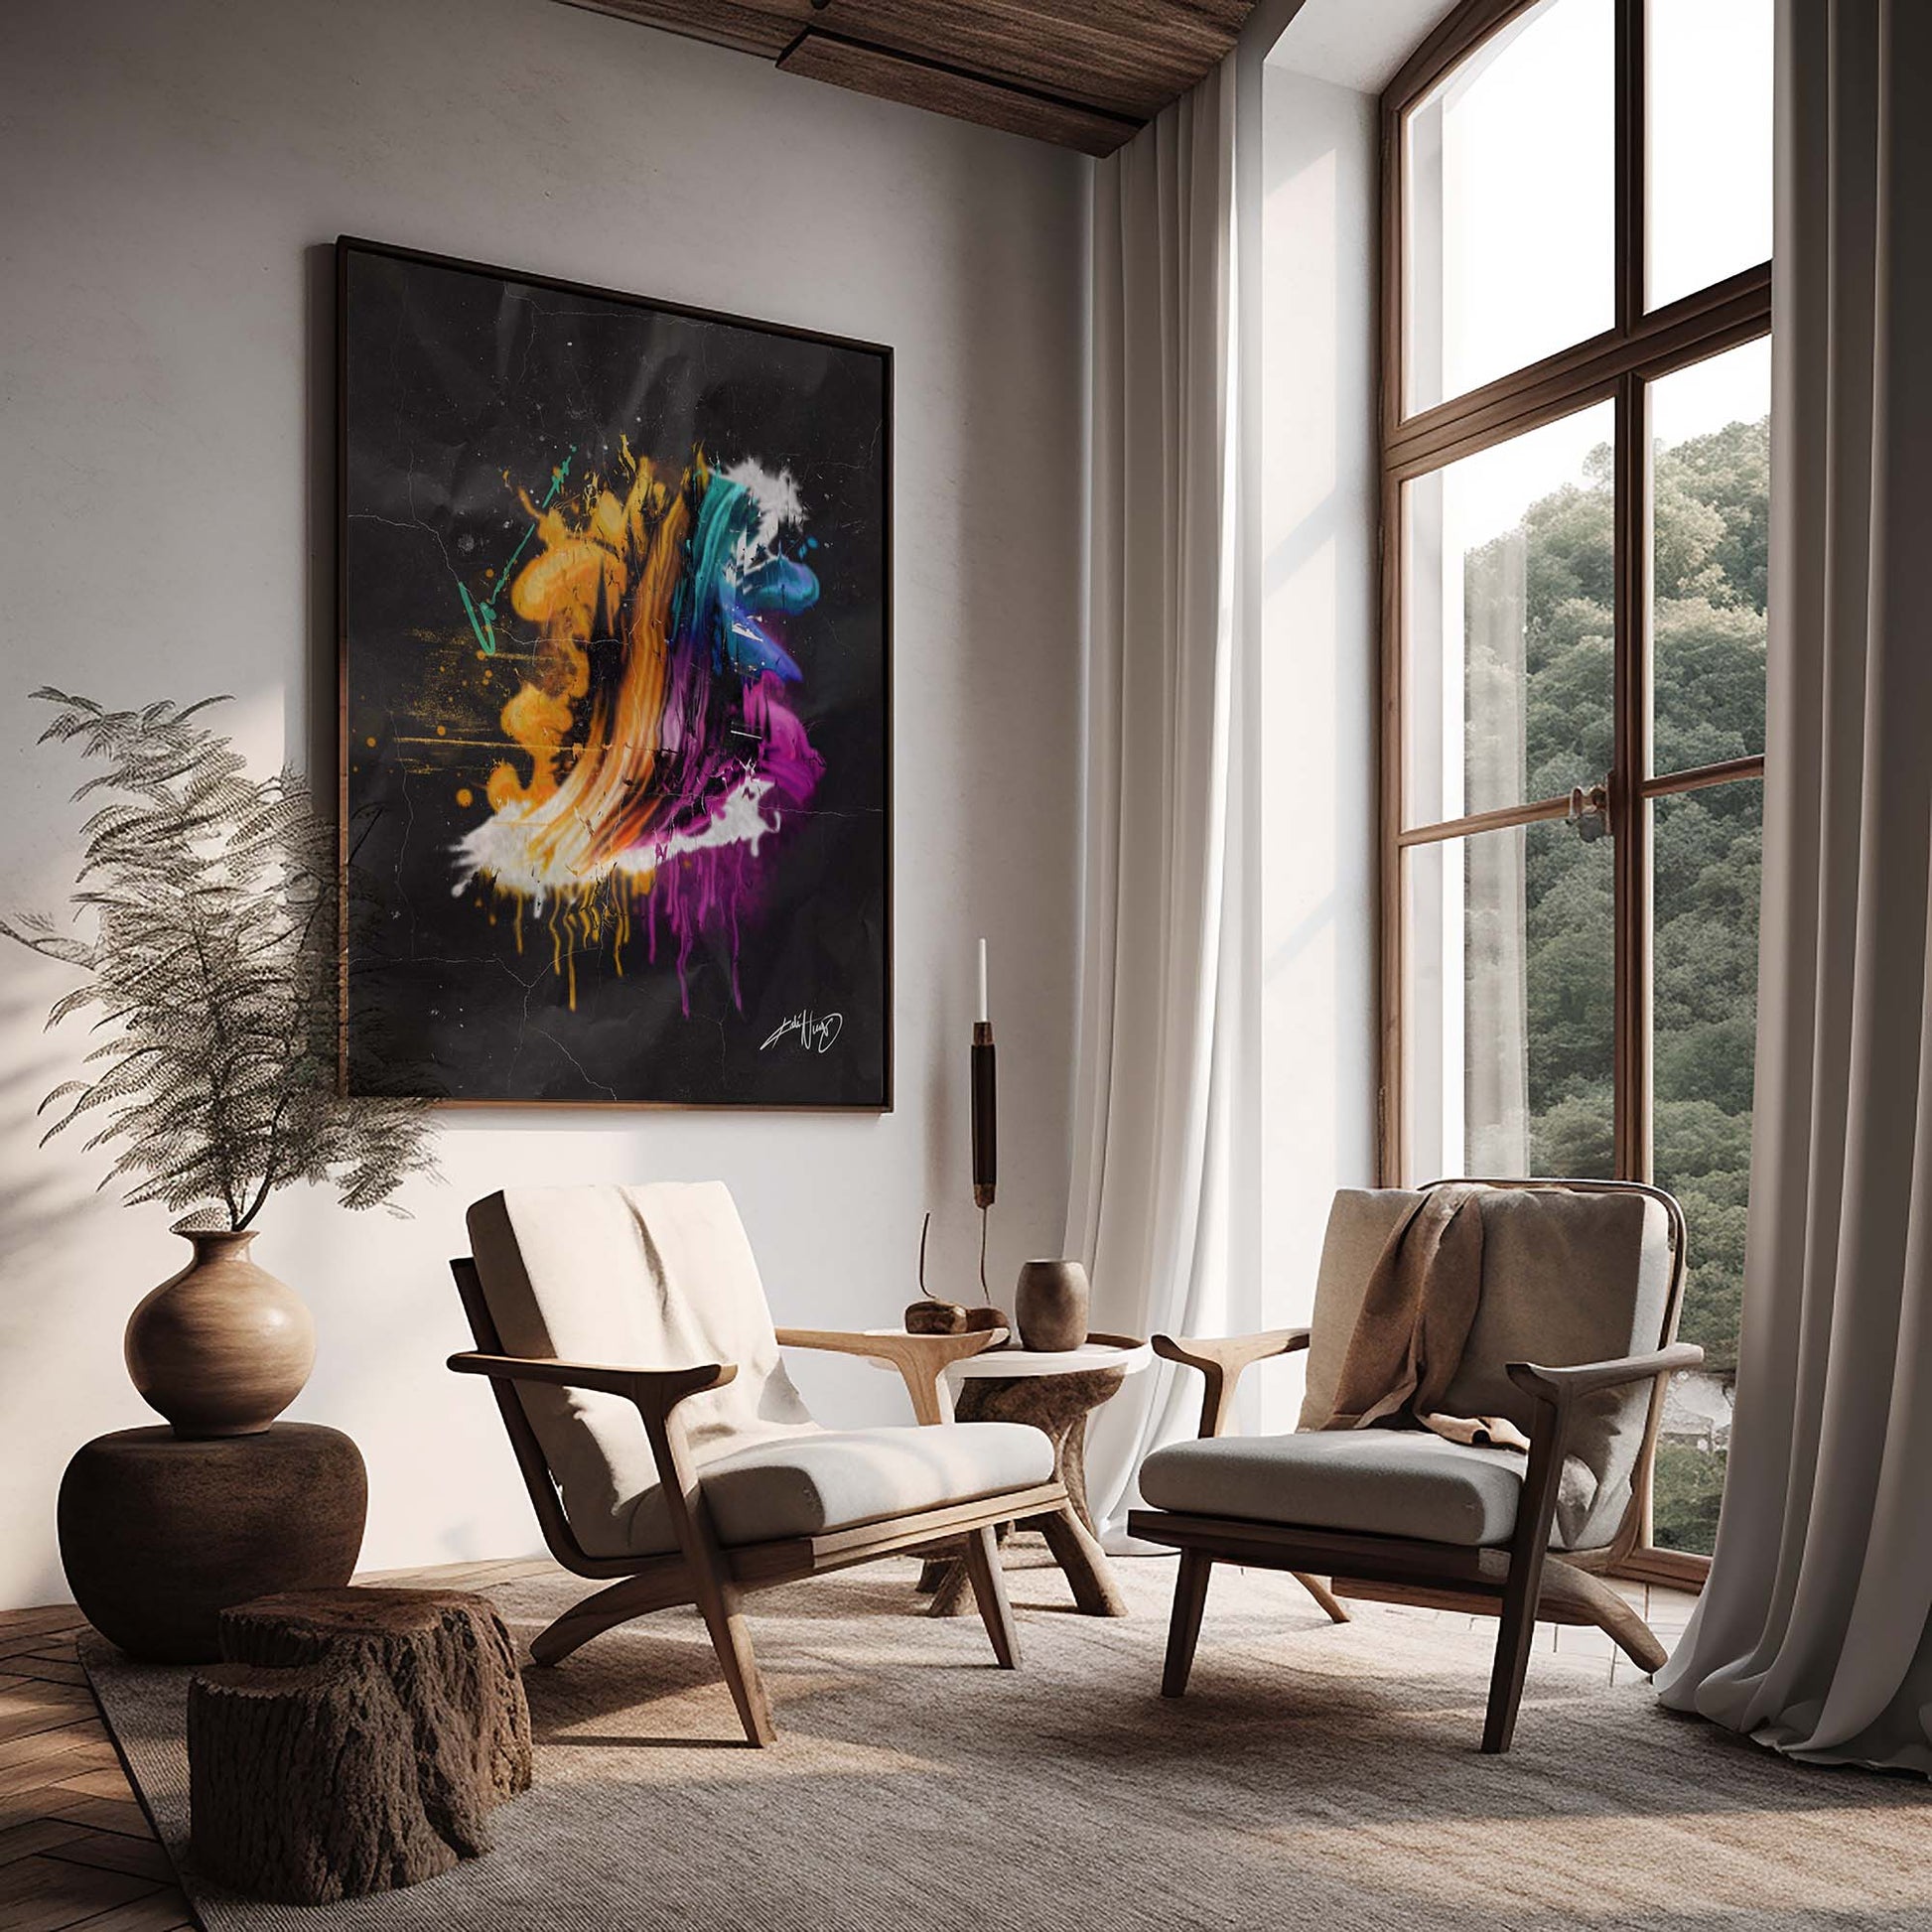 colorful abstract art poster in a black wood frame inside a nice home decor.